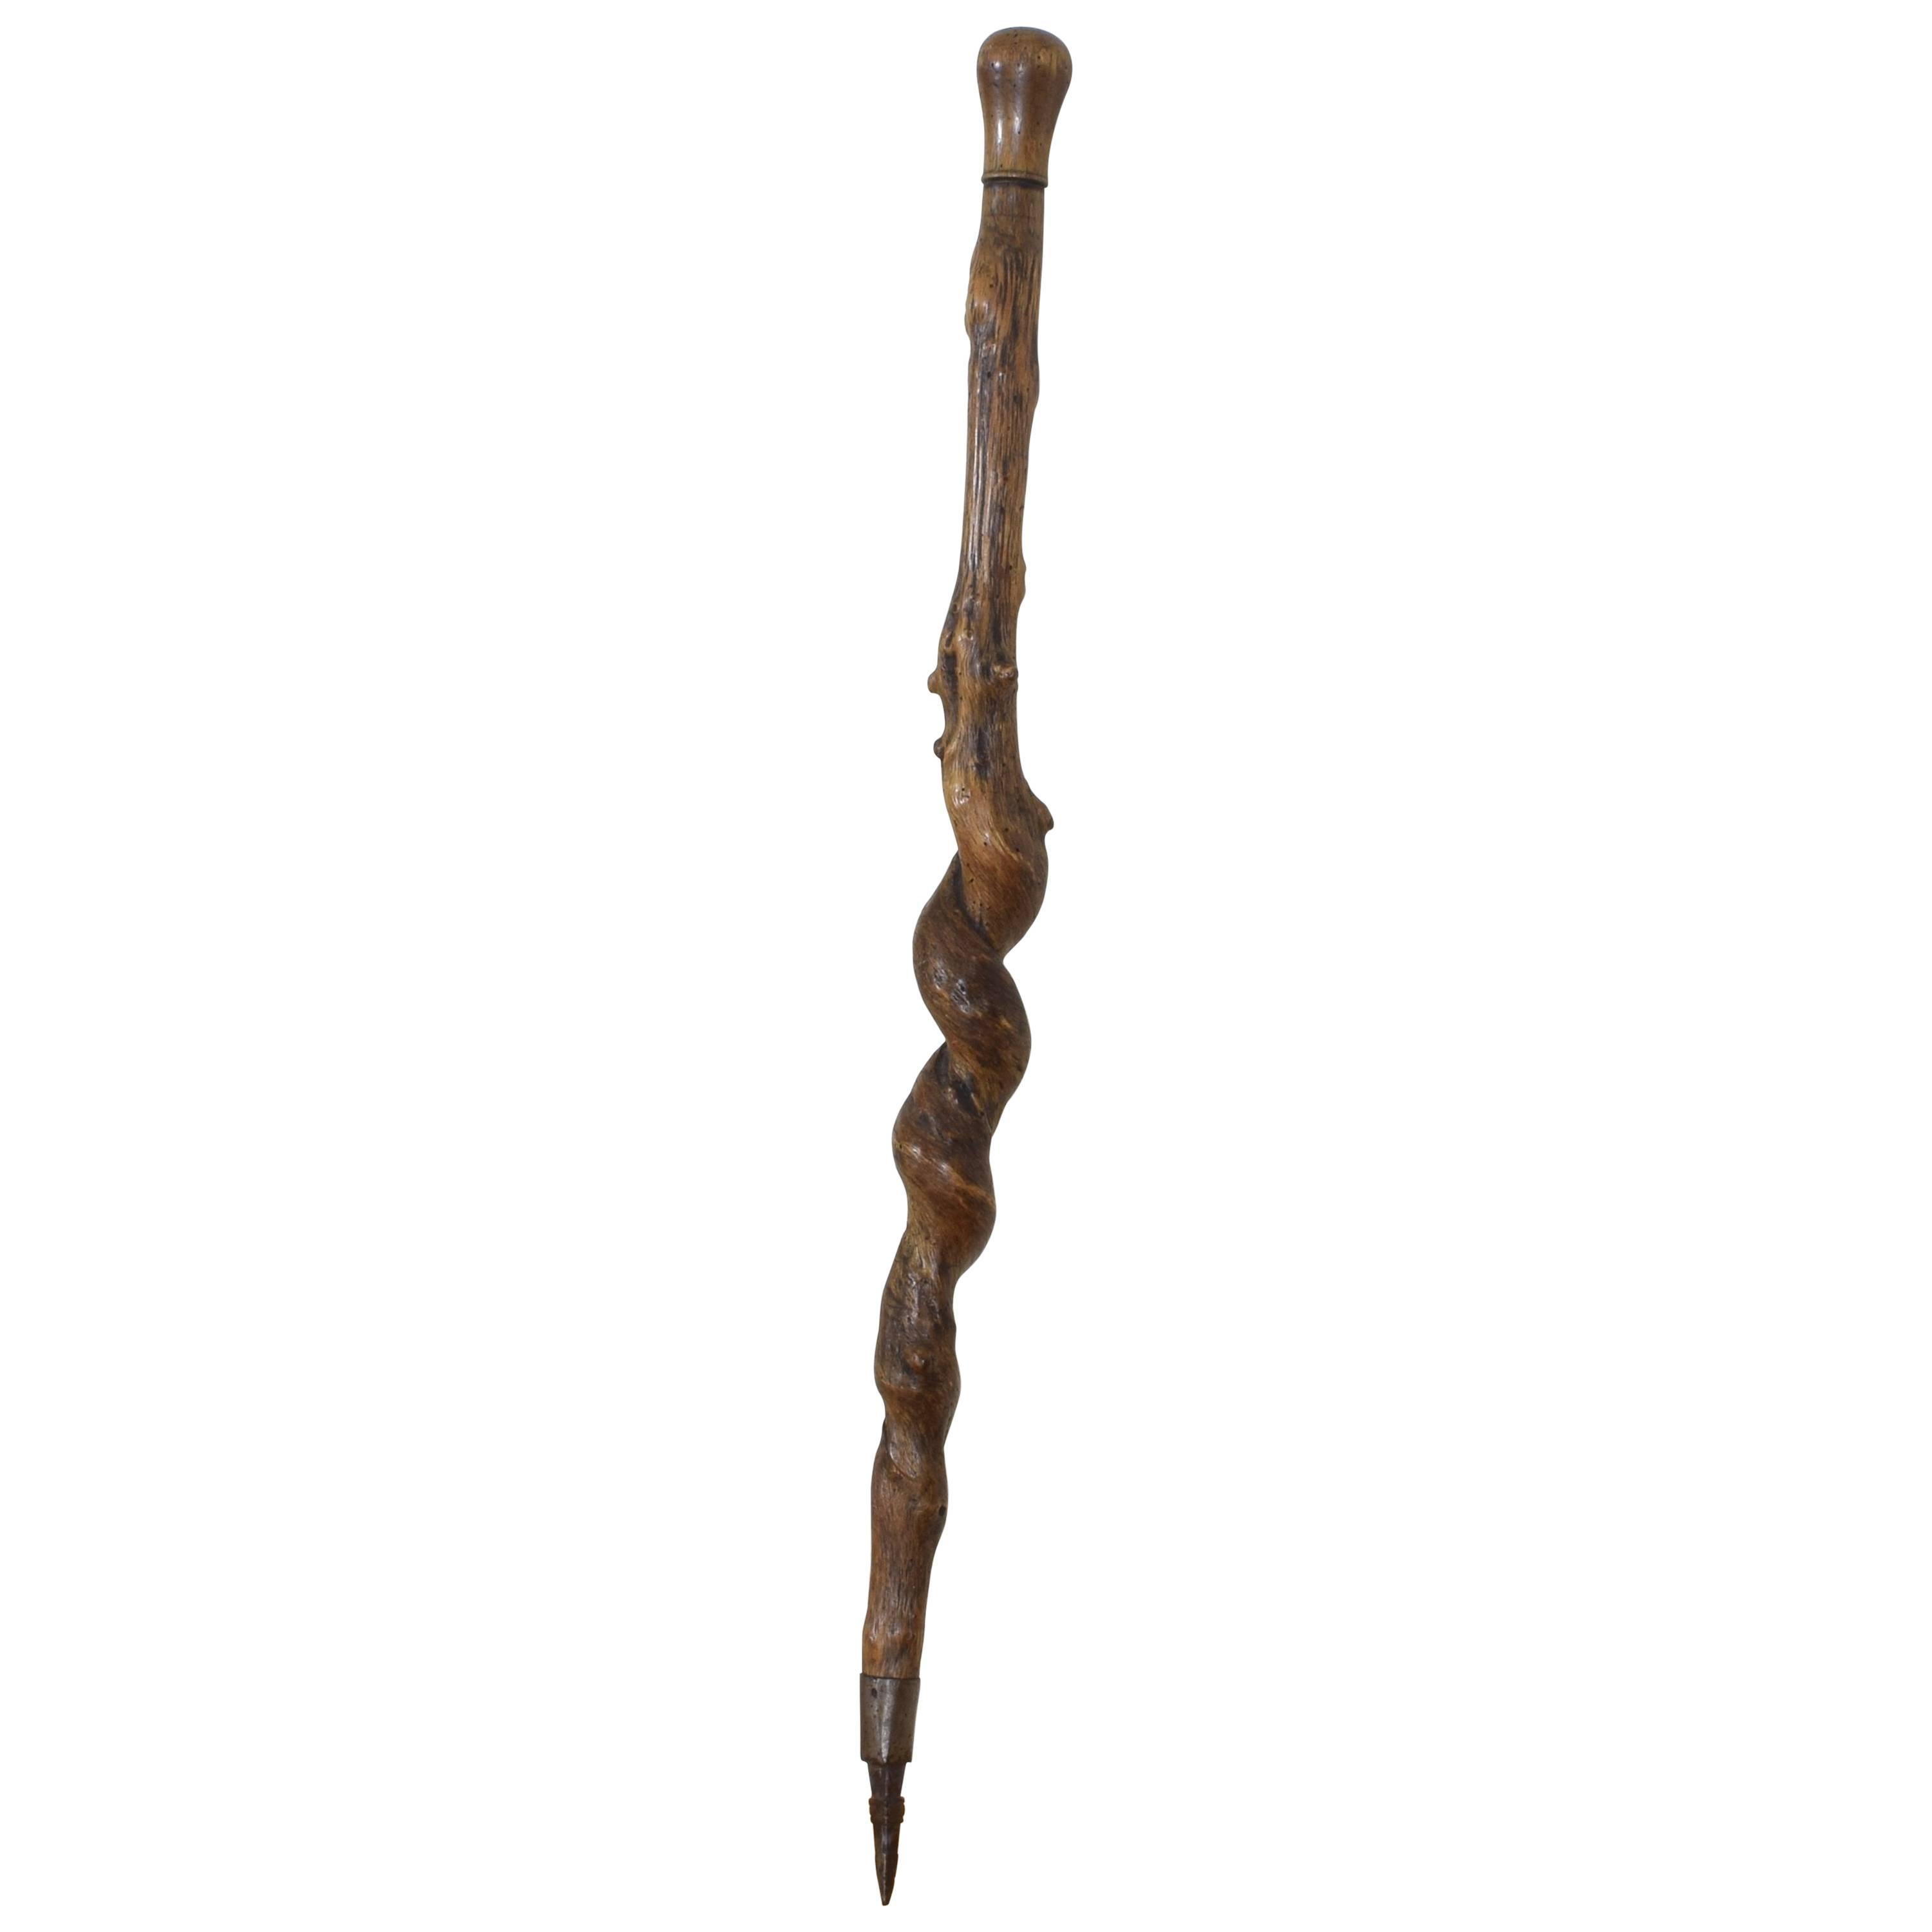 French Walking Stick or Poker, Late 19th-Early 20th Century